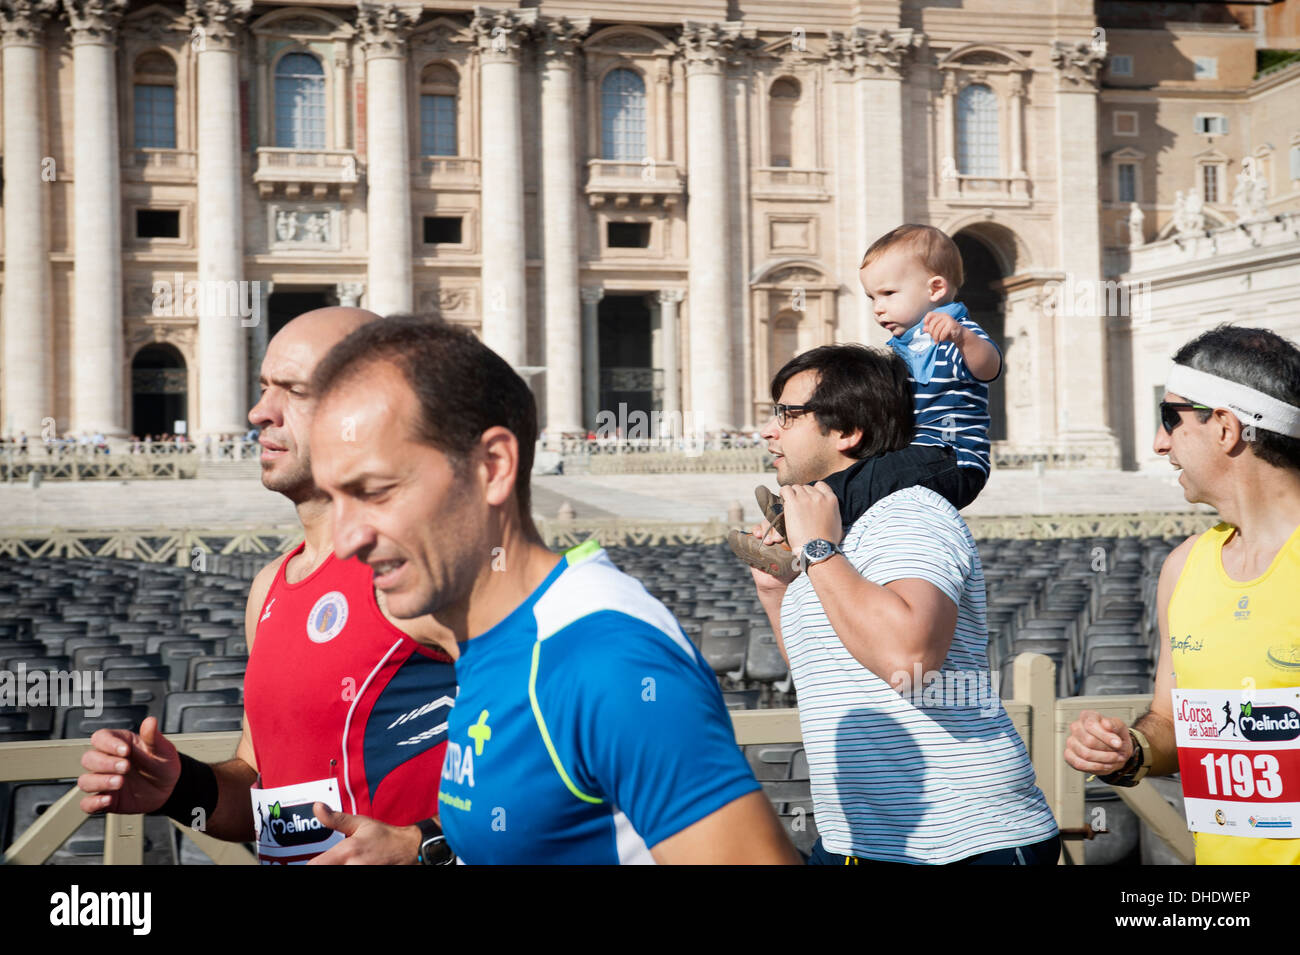 Father runs with his son on his shoulders before race in Vatican city Stock Photo